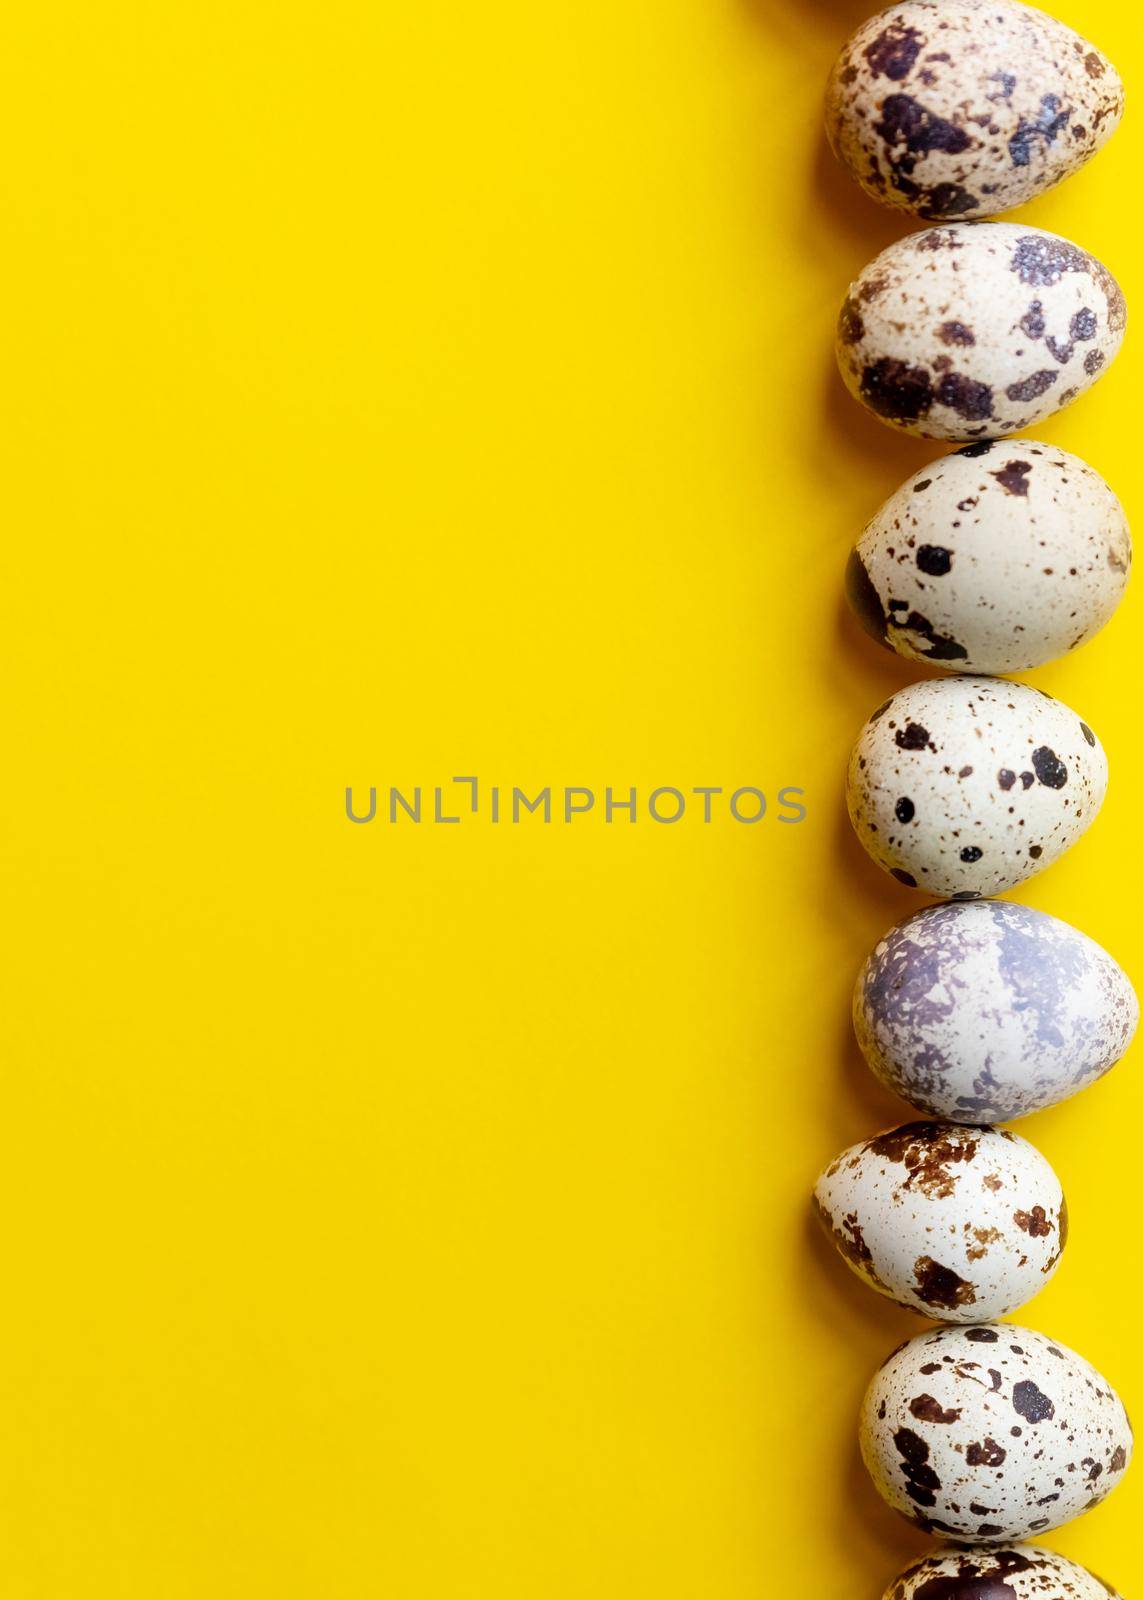 Top view ,Row of small speckled Quail eggs on yellow background. Minimal Happy Easter composition.healthy lifestyle diet concept. Copy space.organic natural egg. by YuliaYaspe1979